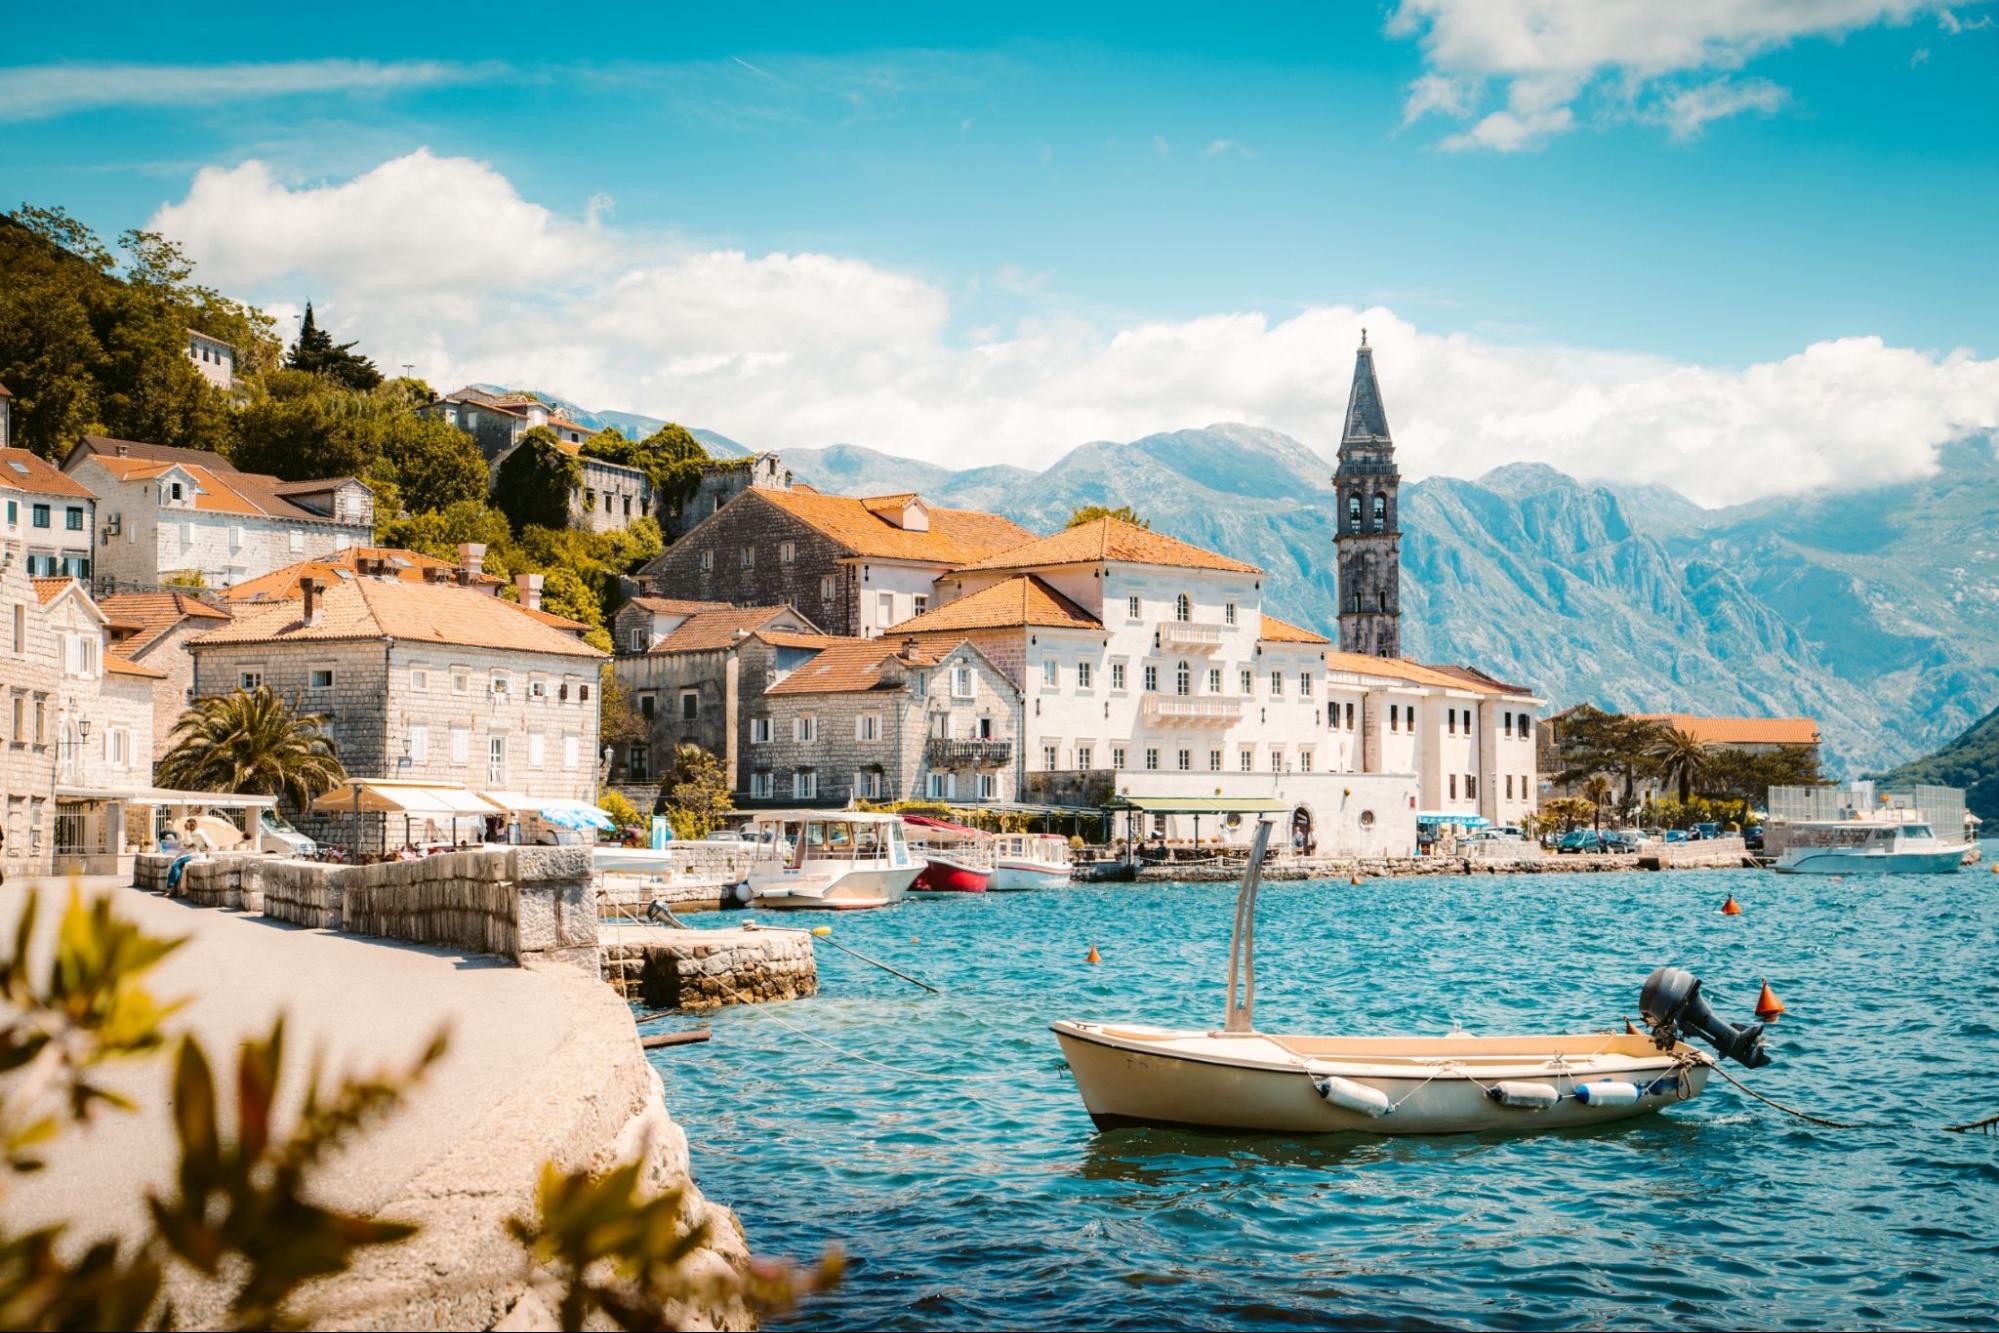 Classic panorama view of the historic town of Perast located at world-famous Bay of Kotor on a beautiful sunny day with blue sky and clouds in summer, Montenegro, southern Europe.